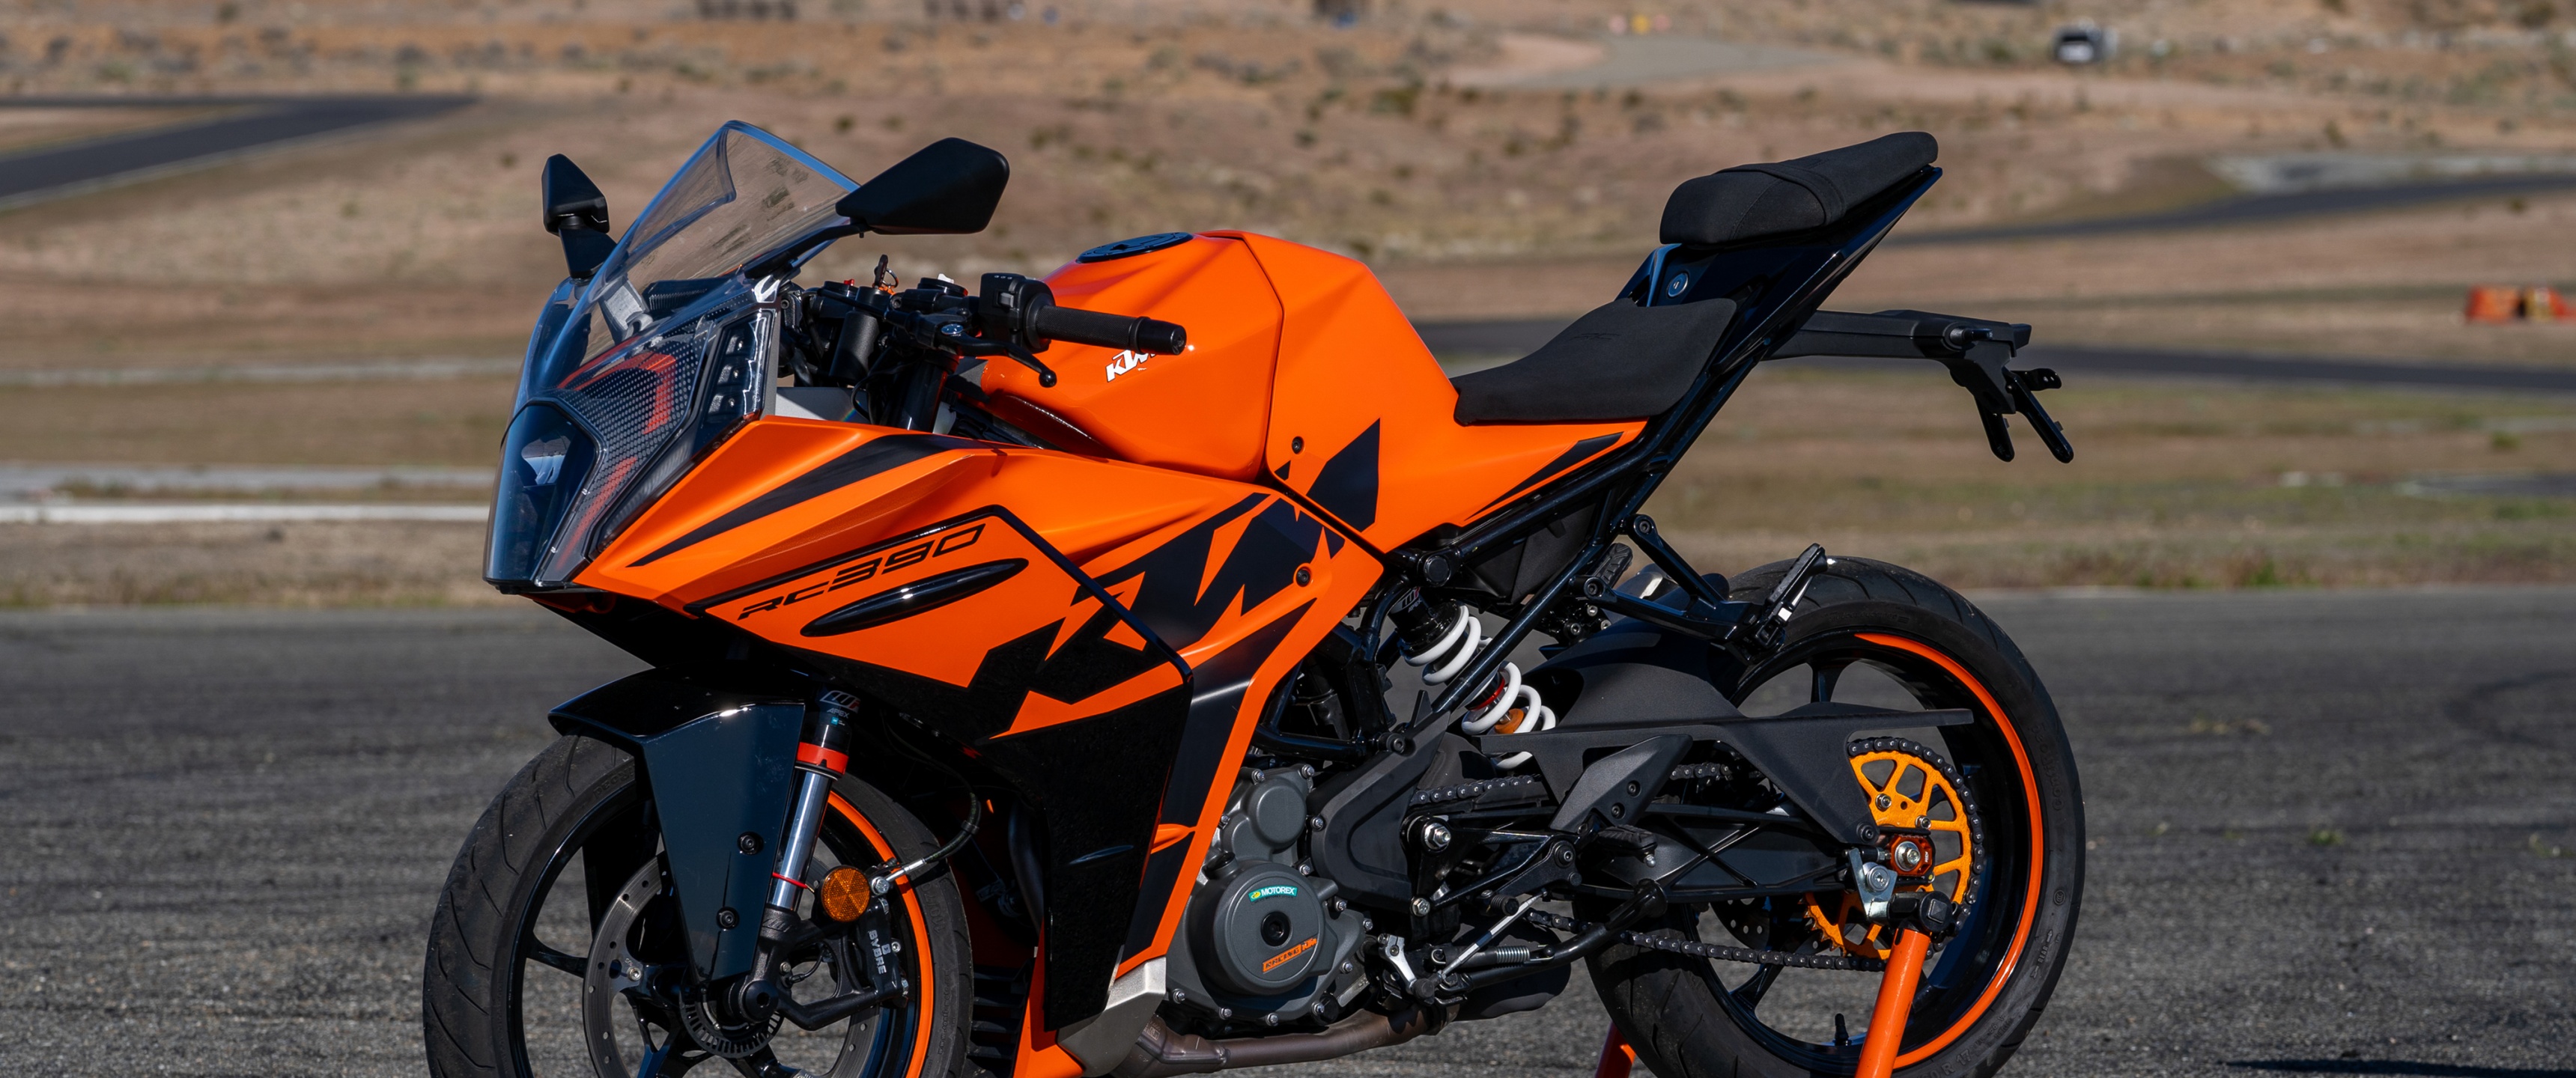 Download Ktm wallpapers for mobile phone free Ktm HD pictures